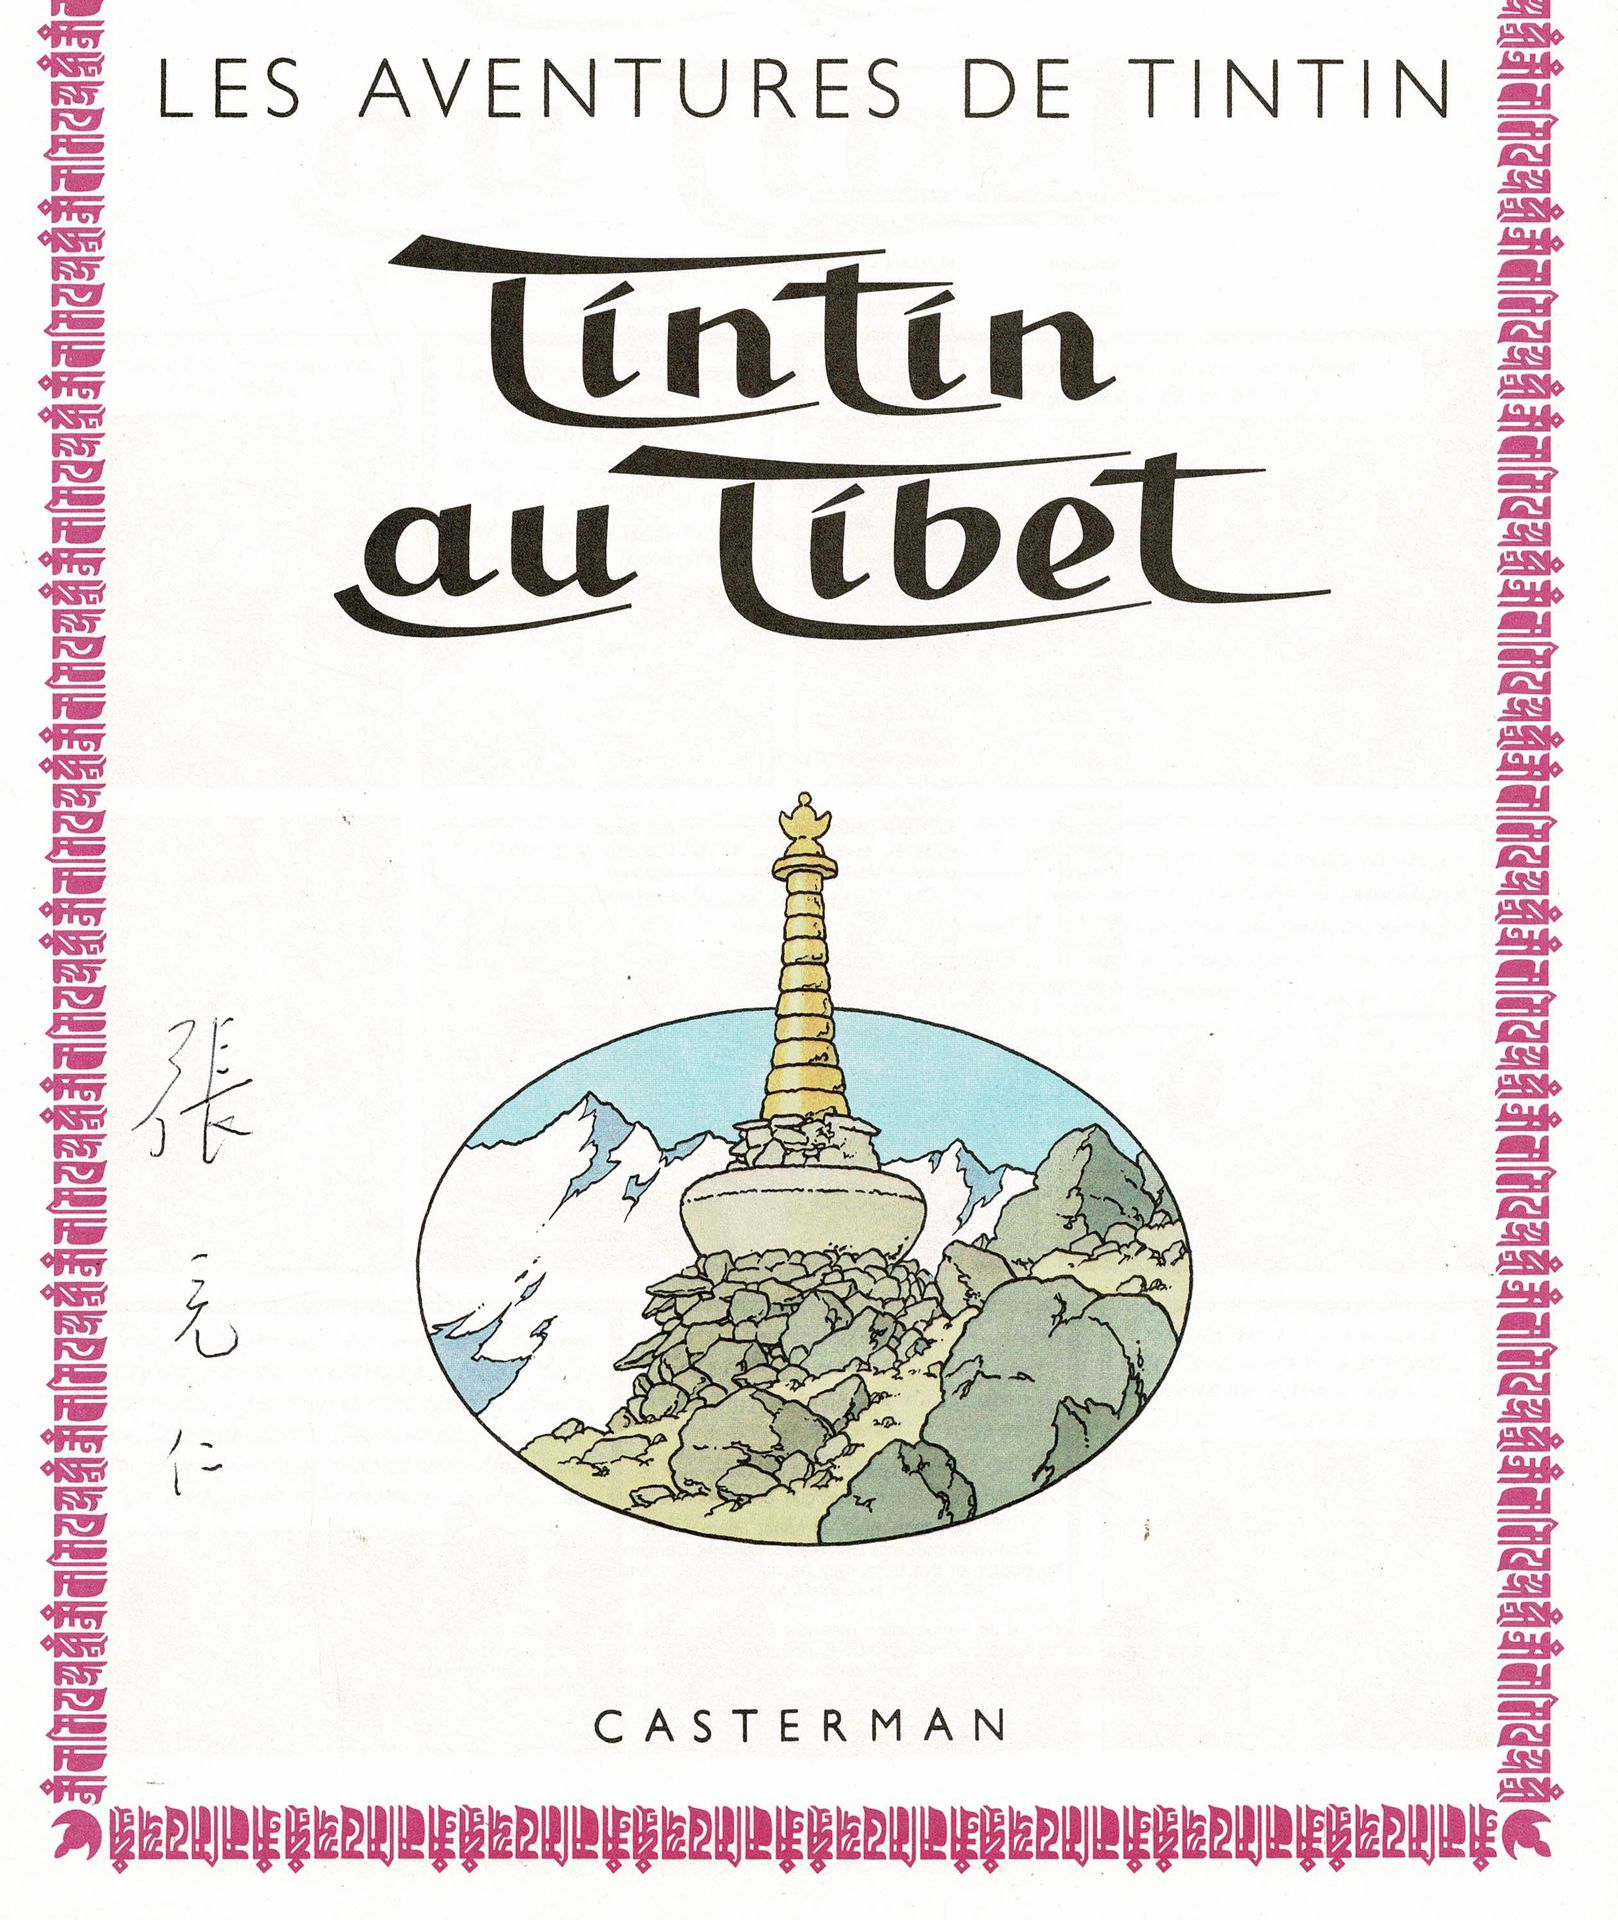 HERGÉ 
Tintin in Tibet (C8, 1987) with Chiang's signature. New condition.